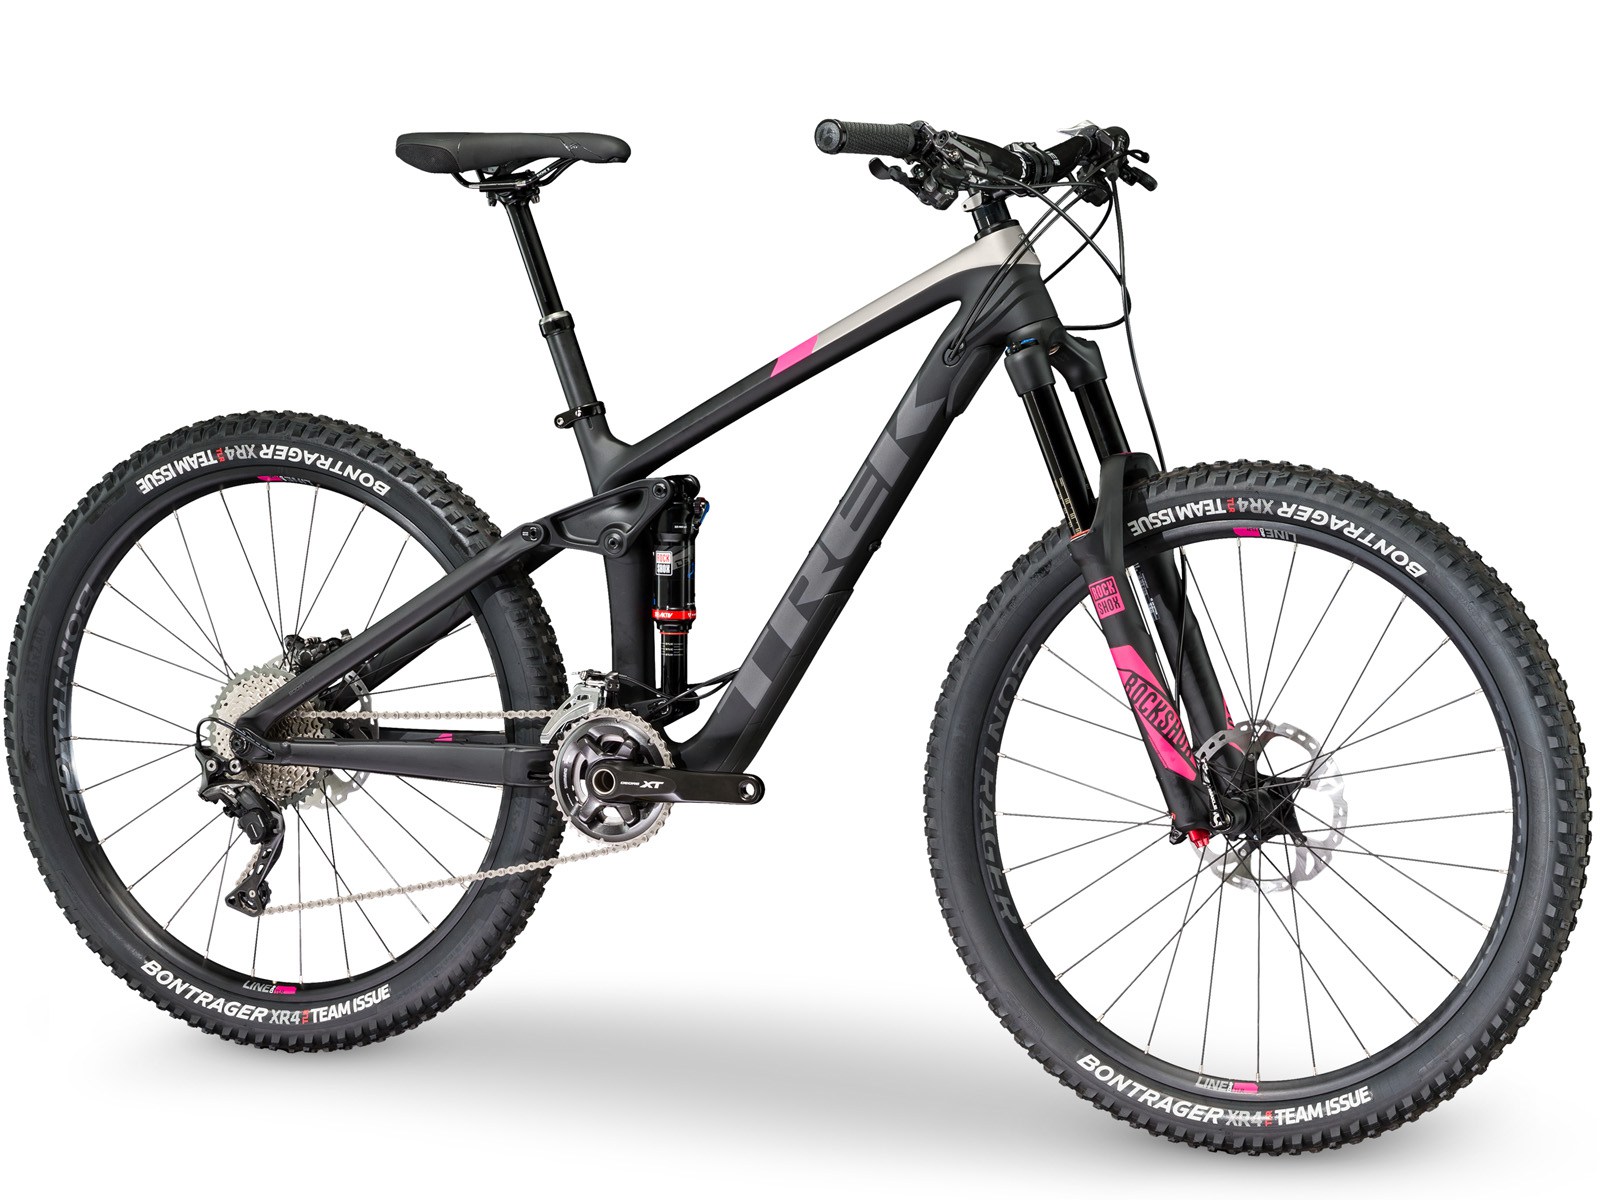  2017 Trek Remedy 9.8 Women’s edition. $5,299 US in case you missed it.